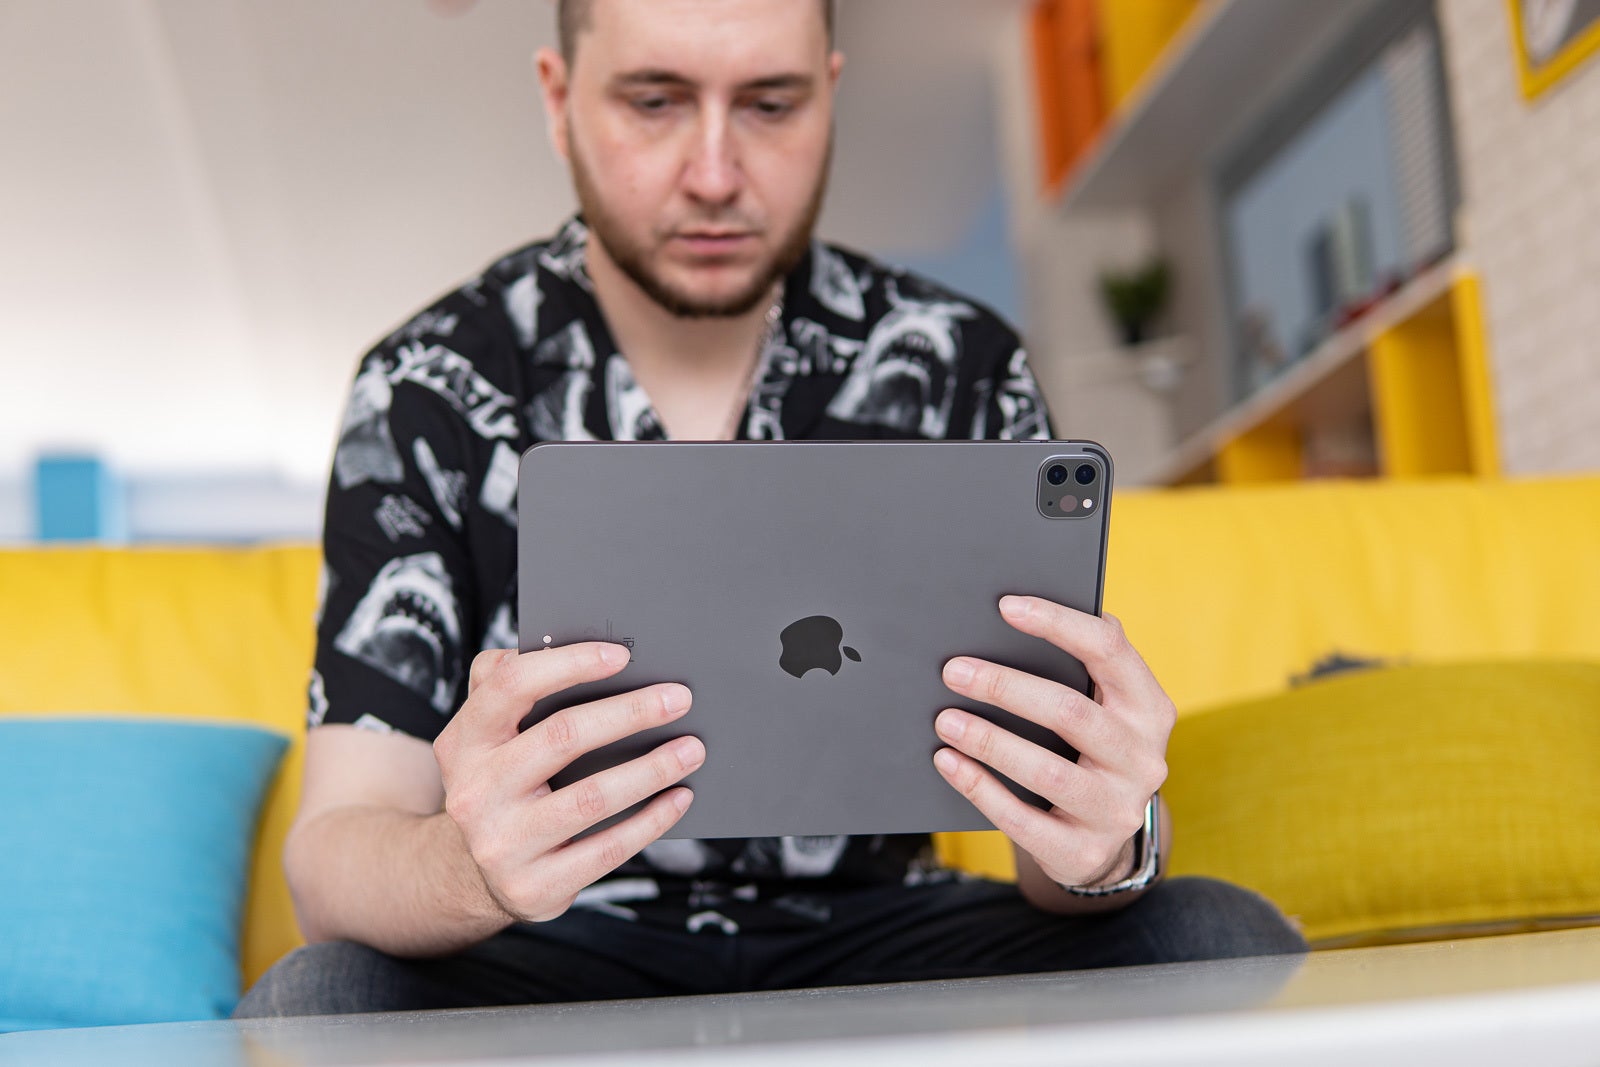 Apple iPad Pro (2021) release date, price, features and news